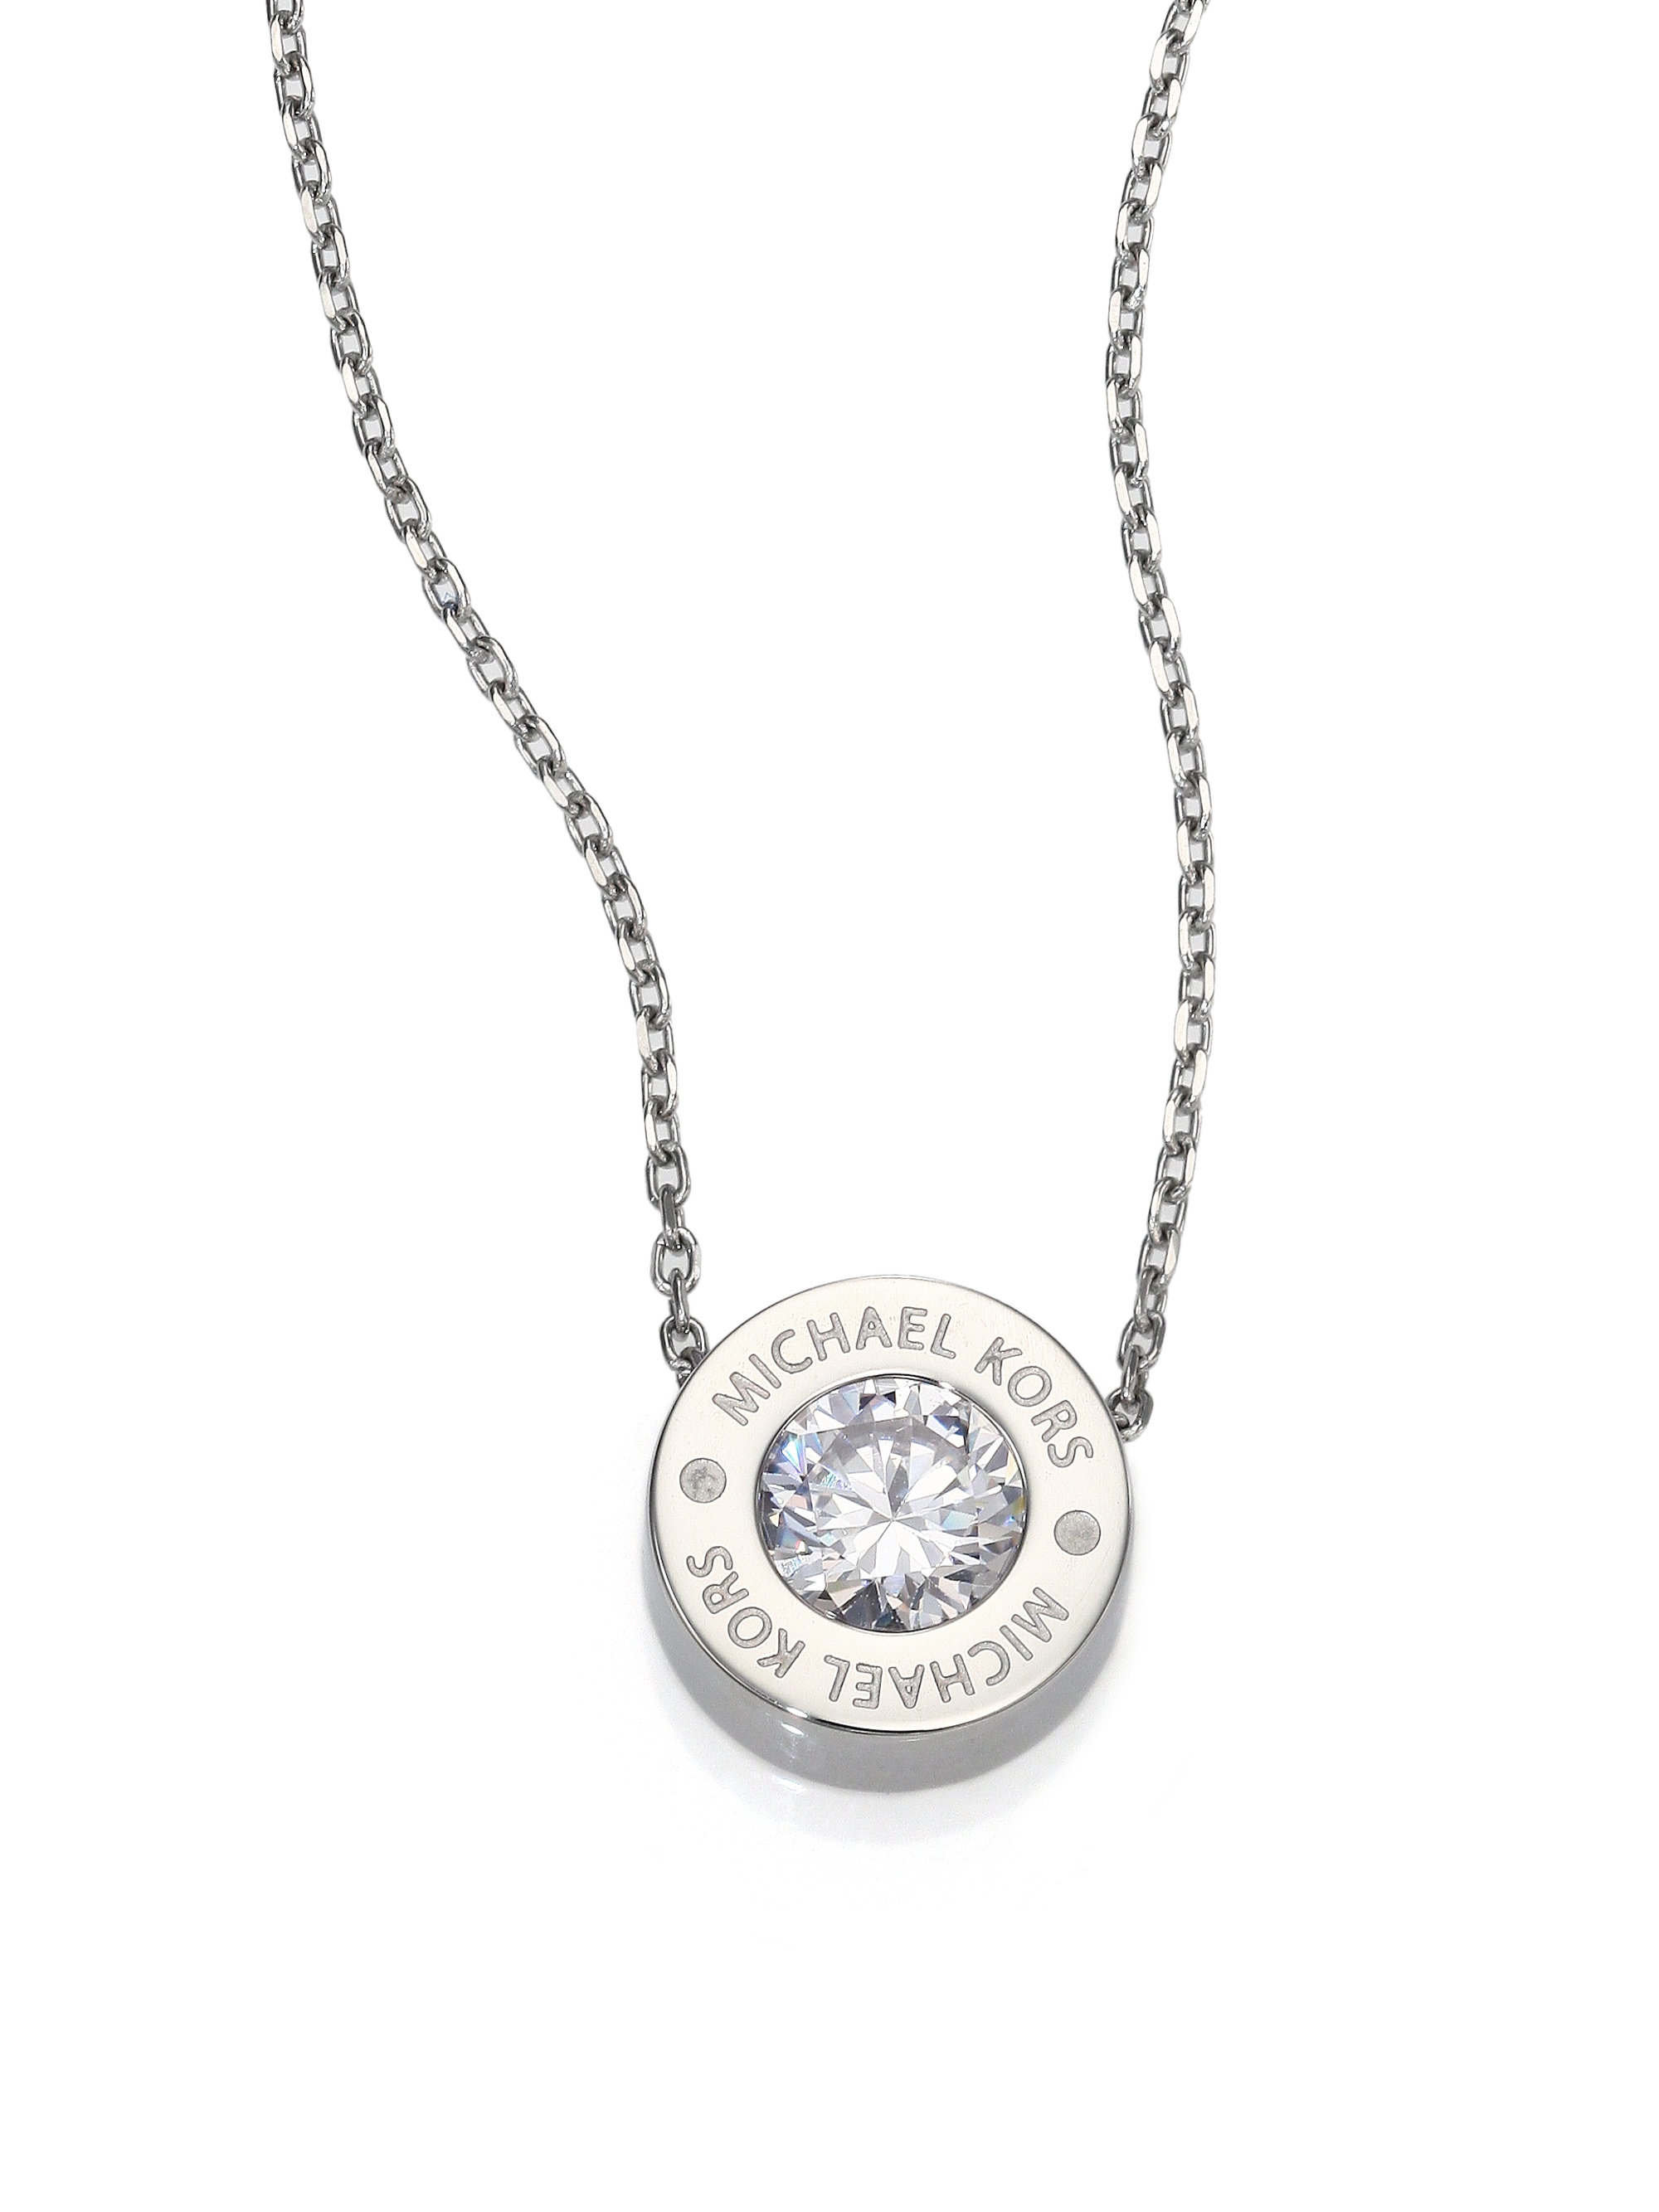 MICHAEL KORS KORS COLOR NECKLACE Silver  Inglessis